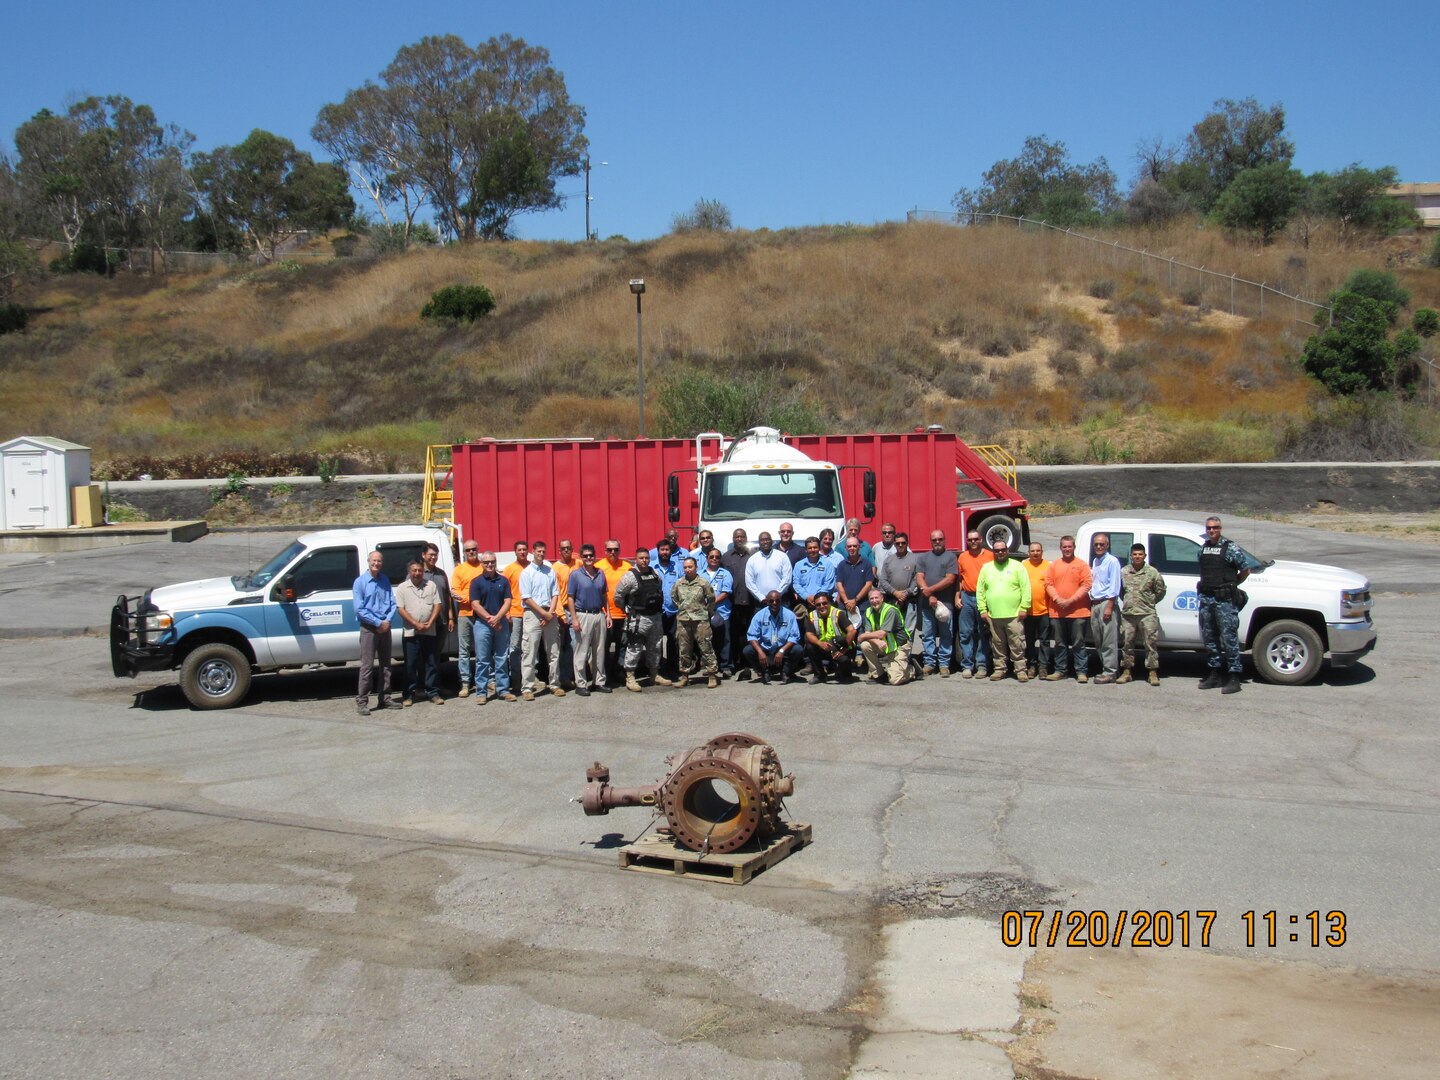 DFSP San Pedro’s closure support team photo, July 20.